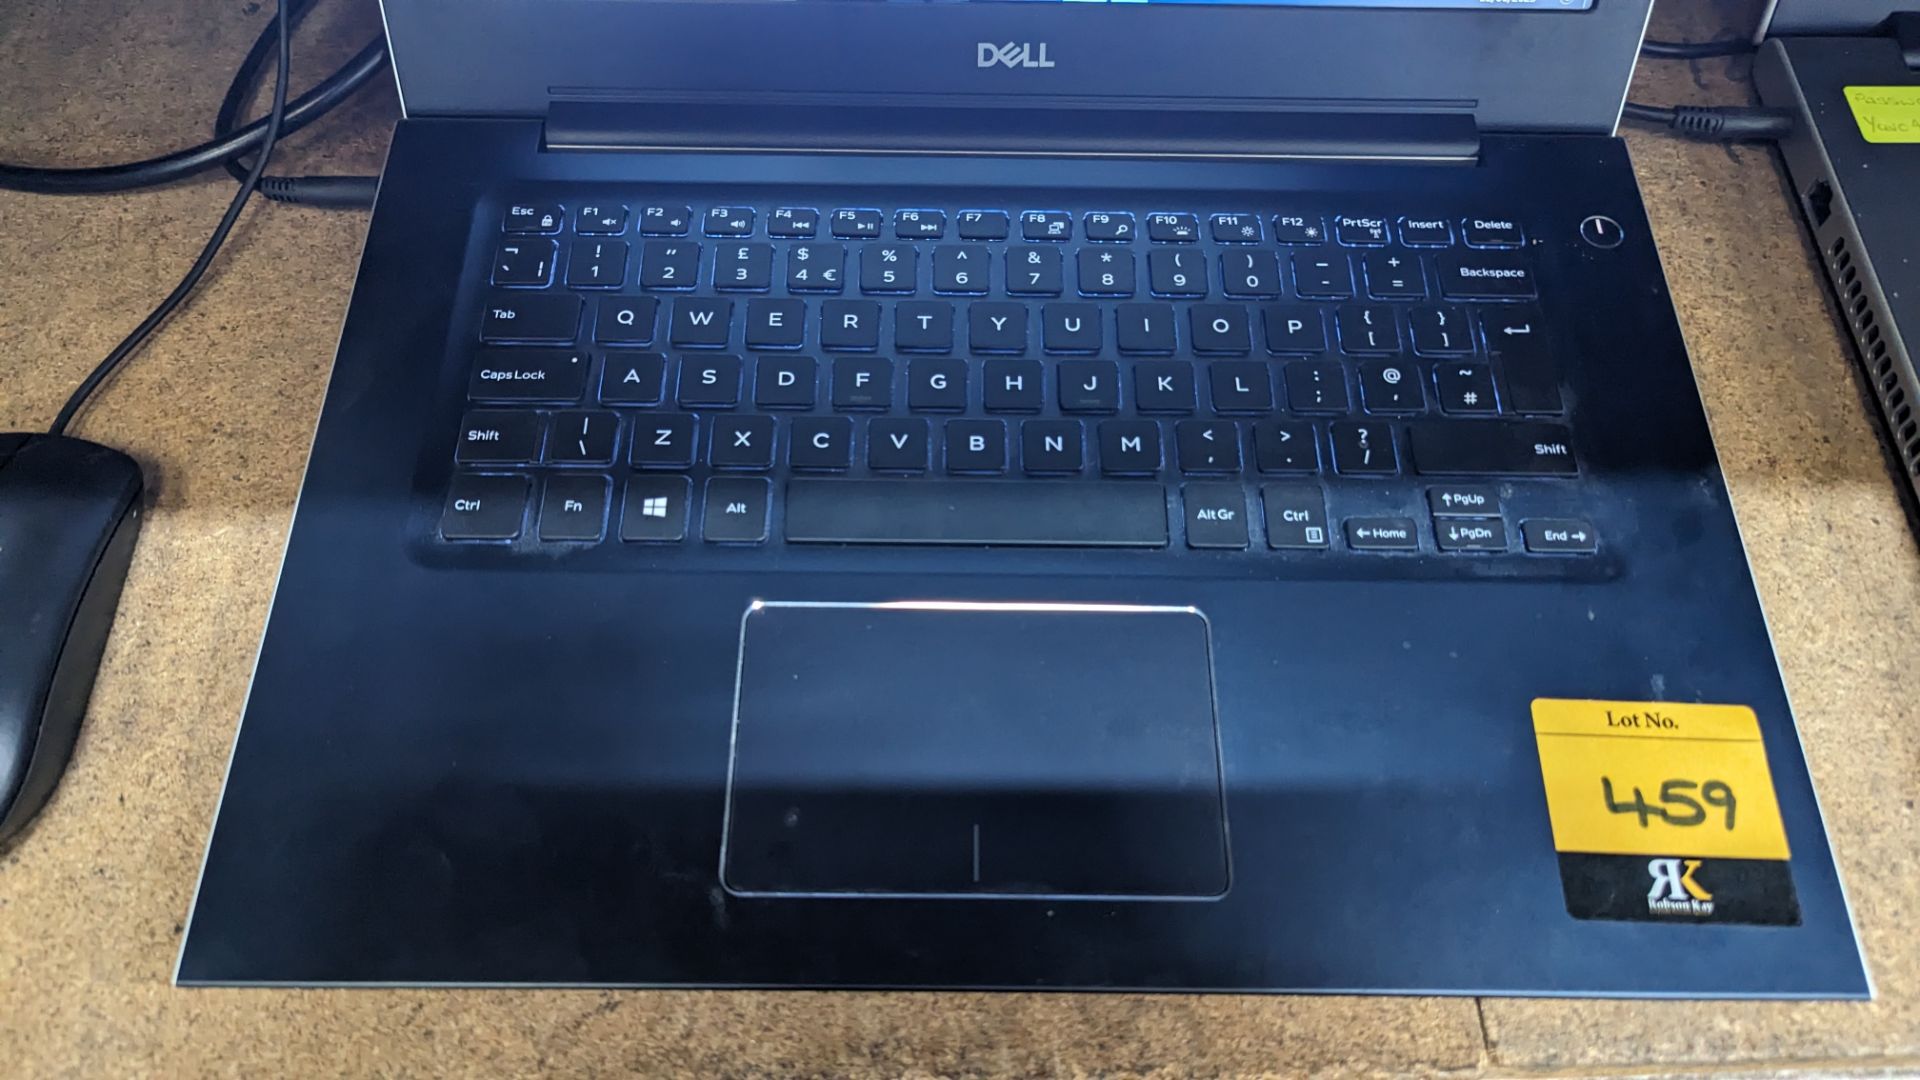 Dell Vostro notebook computer with Intel Core i5-8250 CPU, 8GB RAM, 256GB SSD including power pack/c - Image 6 of 17